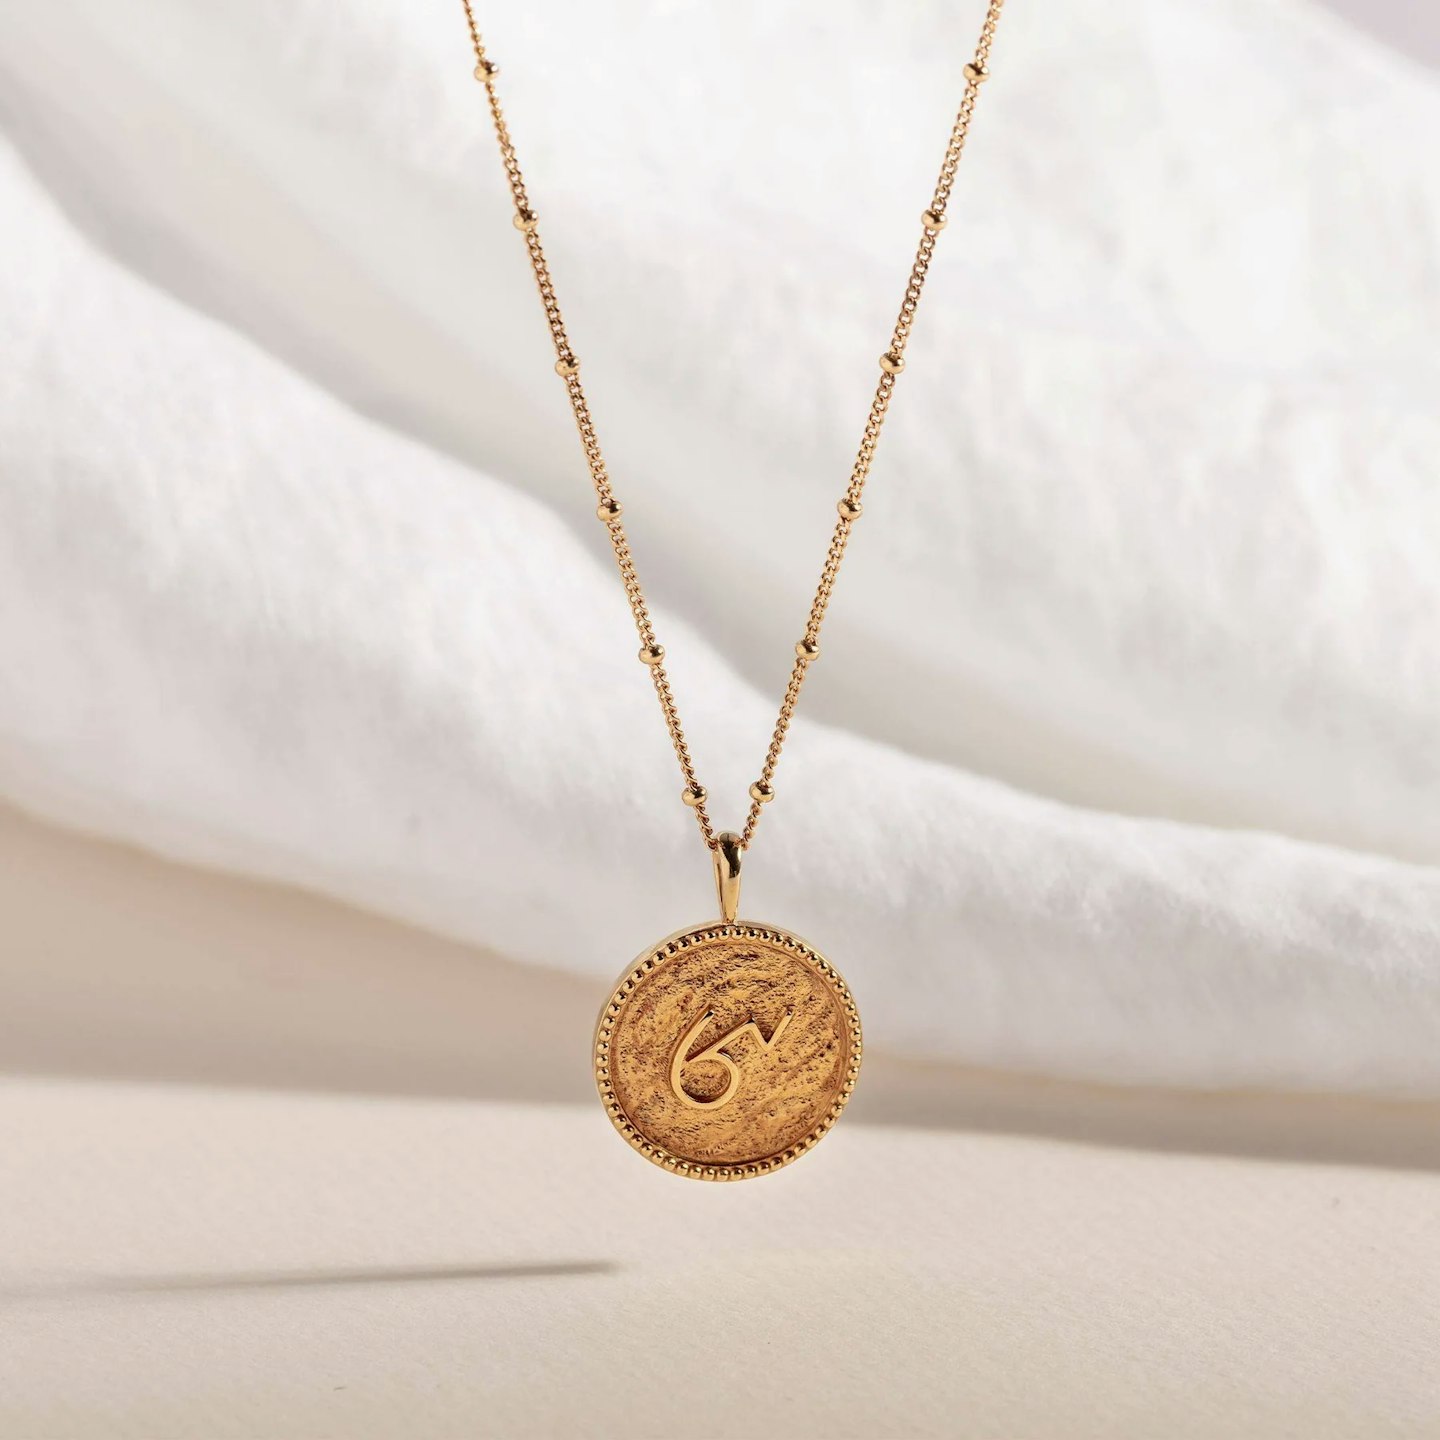 Claire Hill Designs 14K Gold Vermeil Double-Sided Necklace